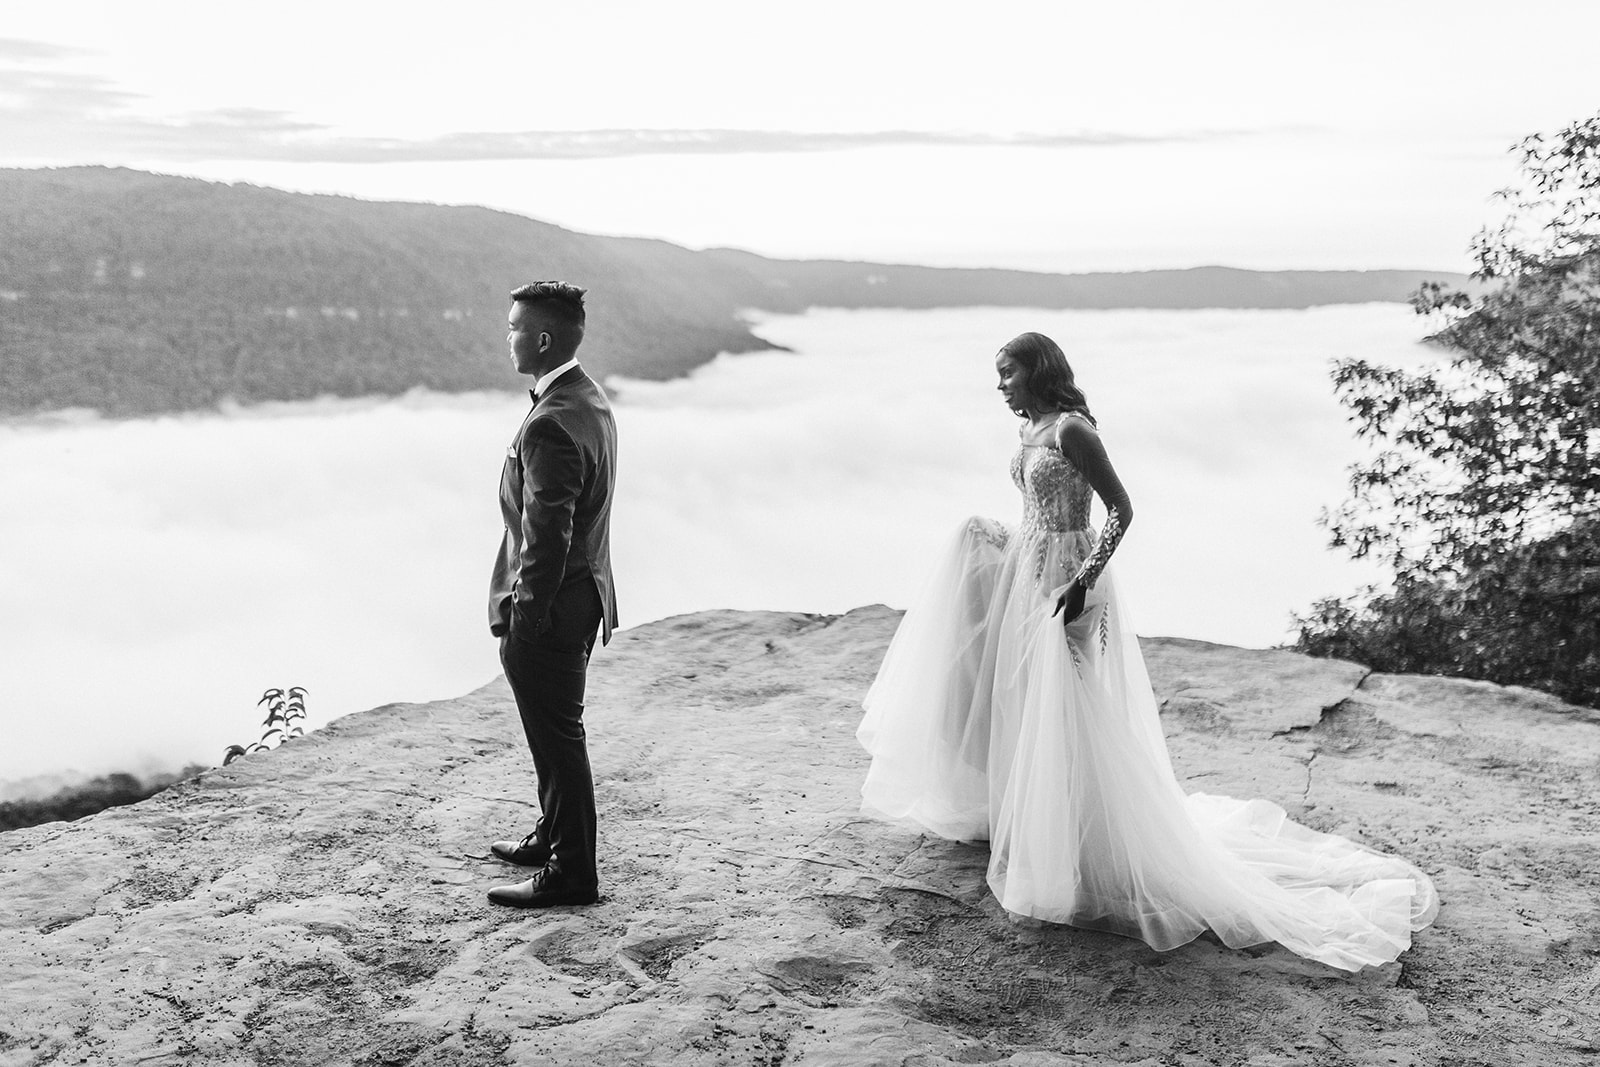 Bride approaches groom with his back to her on a mountain overlook during their engagement photo session near Chattanooga.